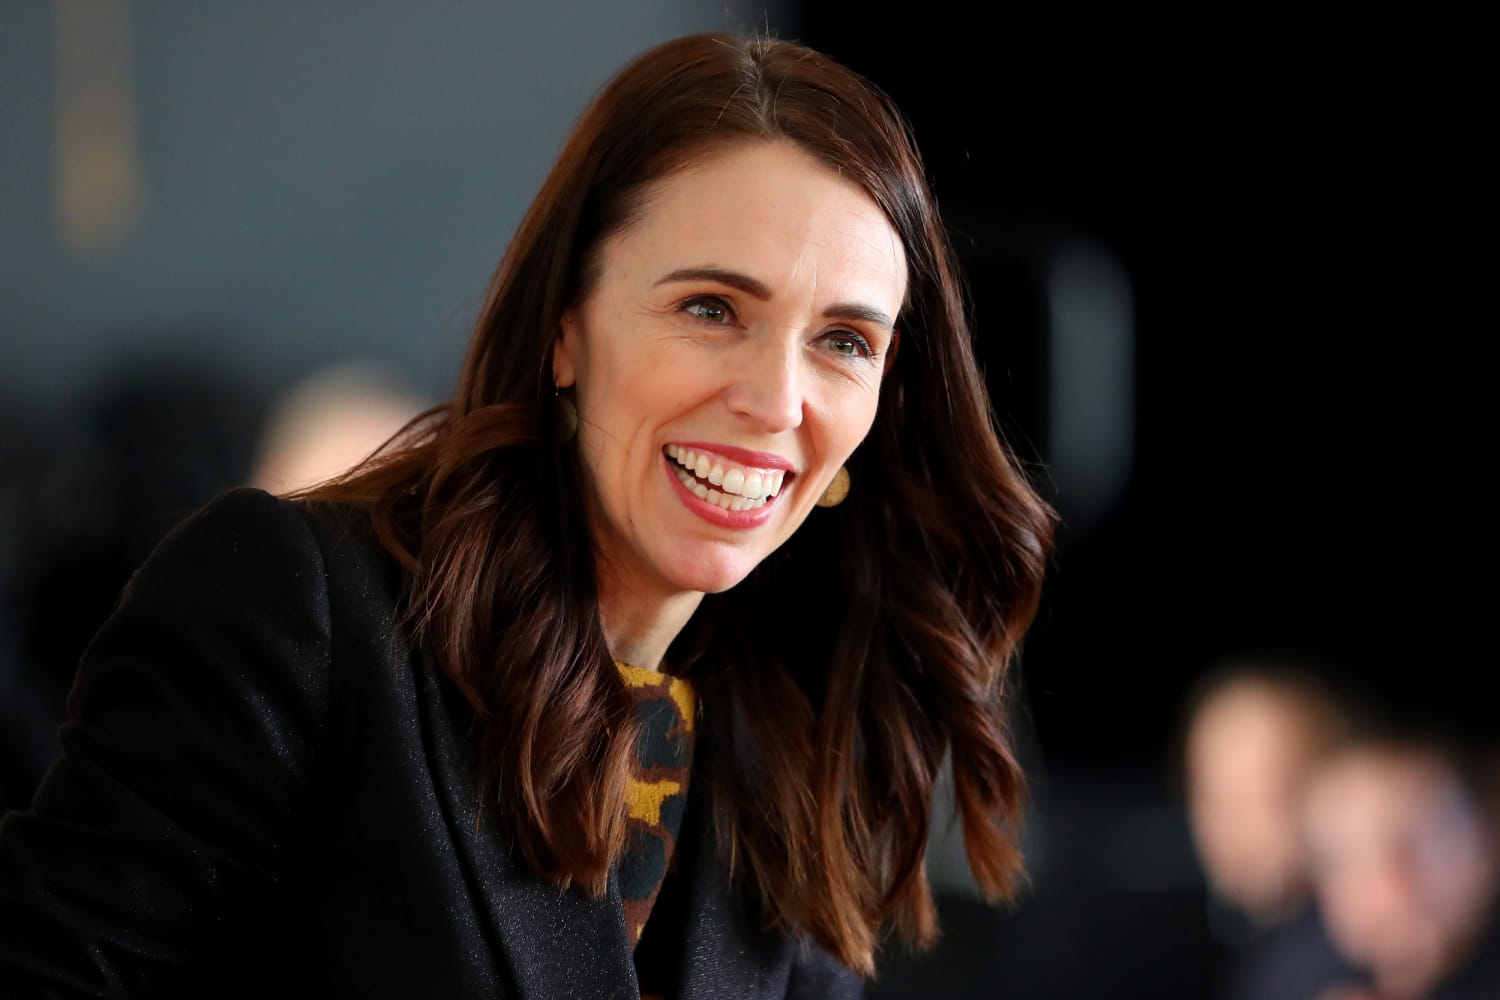 ‘You’re meant to be in bed’: Jacinda Ardern’s daughter interrupts Covid livestream